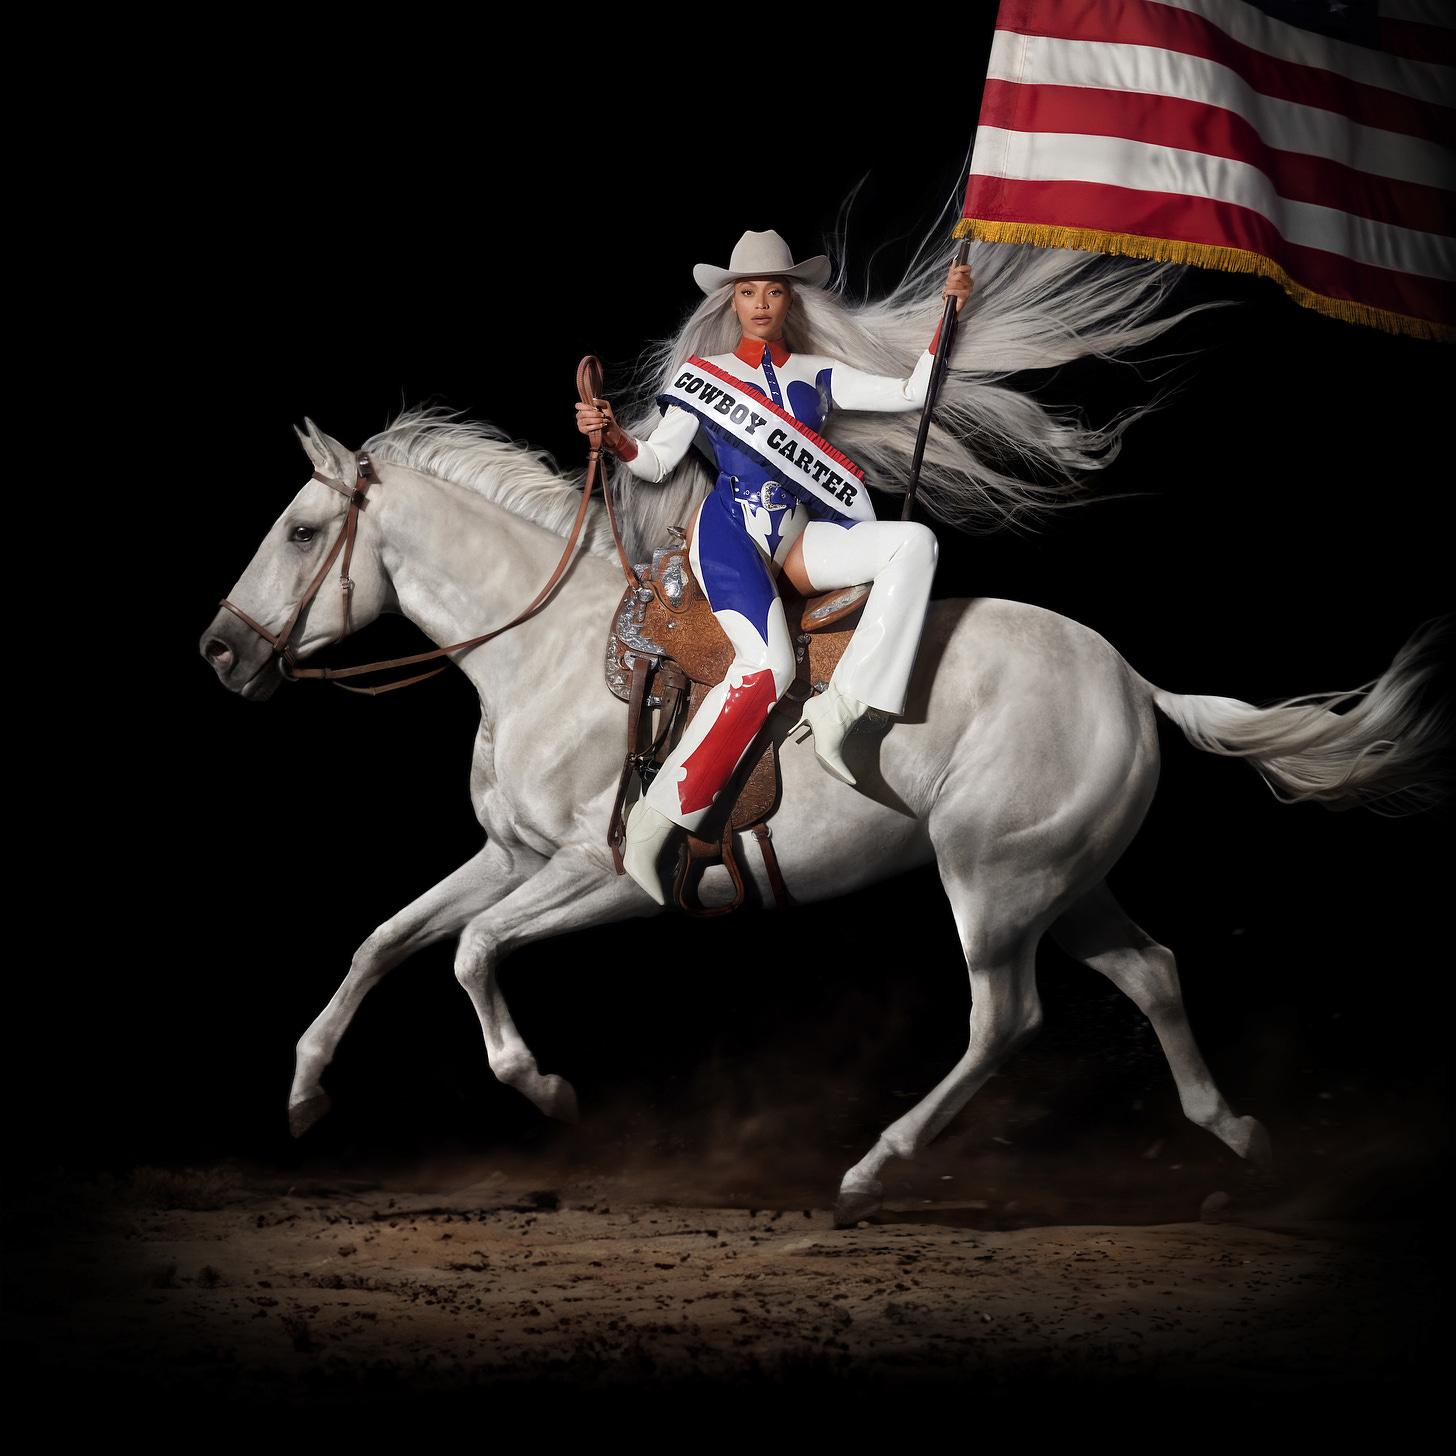 Album cover of Beyoncé's eight studio album, COWBOY CARTER, featuring the singer sitting atop a white horse. She's wearing a white cowboy hat, white cowboy boots and a star-spangled white body suit with a red, white and blue sash that says COWBOY CARTER, while holding the American flag.